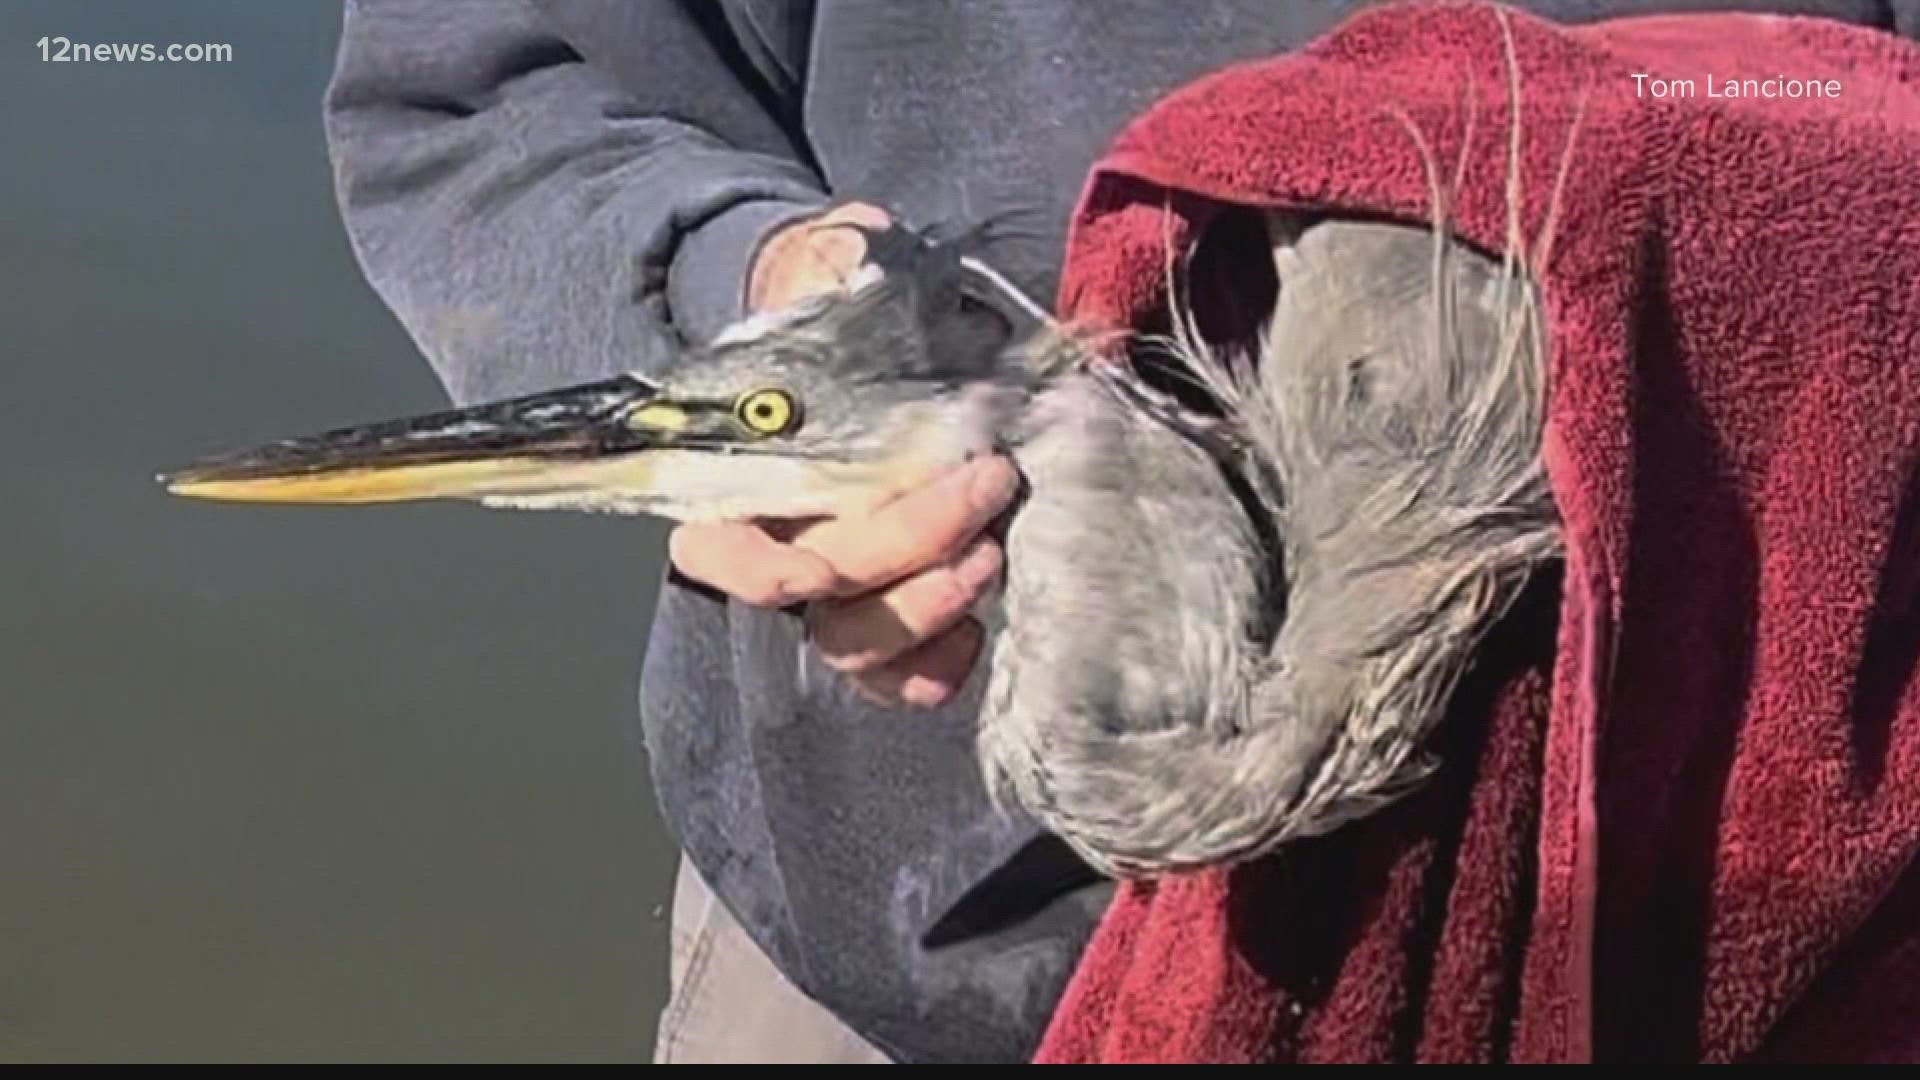 Park-goers in Scottsdale came across a large blue heron in distress on Monday morning. The bird was tangled in fishing line. Passersby stepped in to rescue the bird.